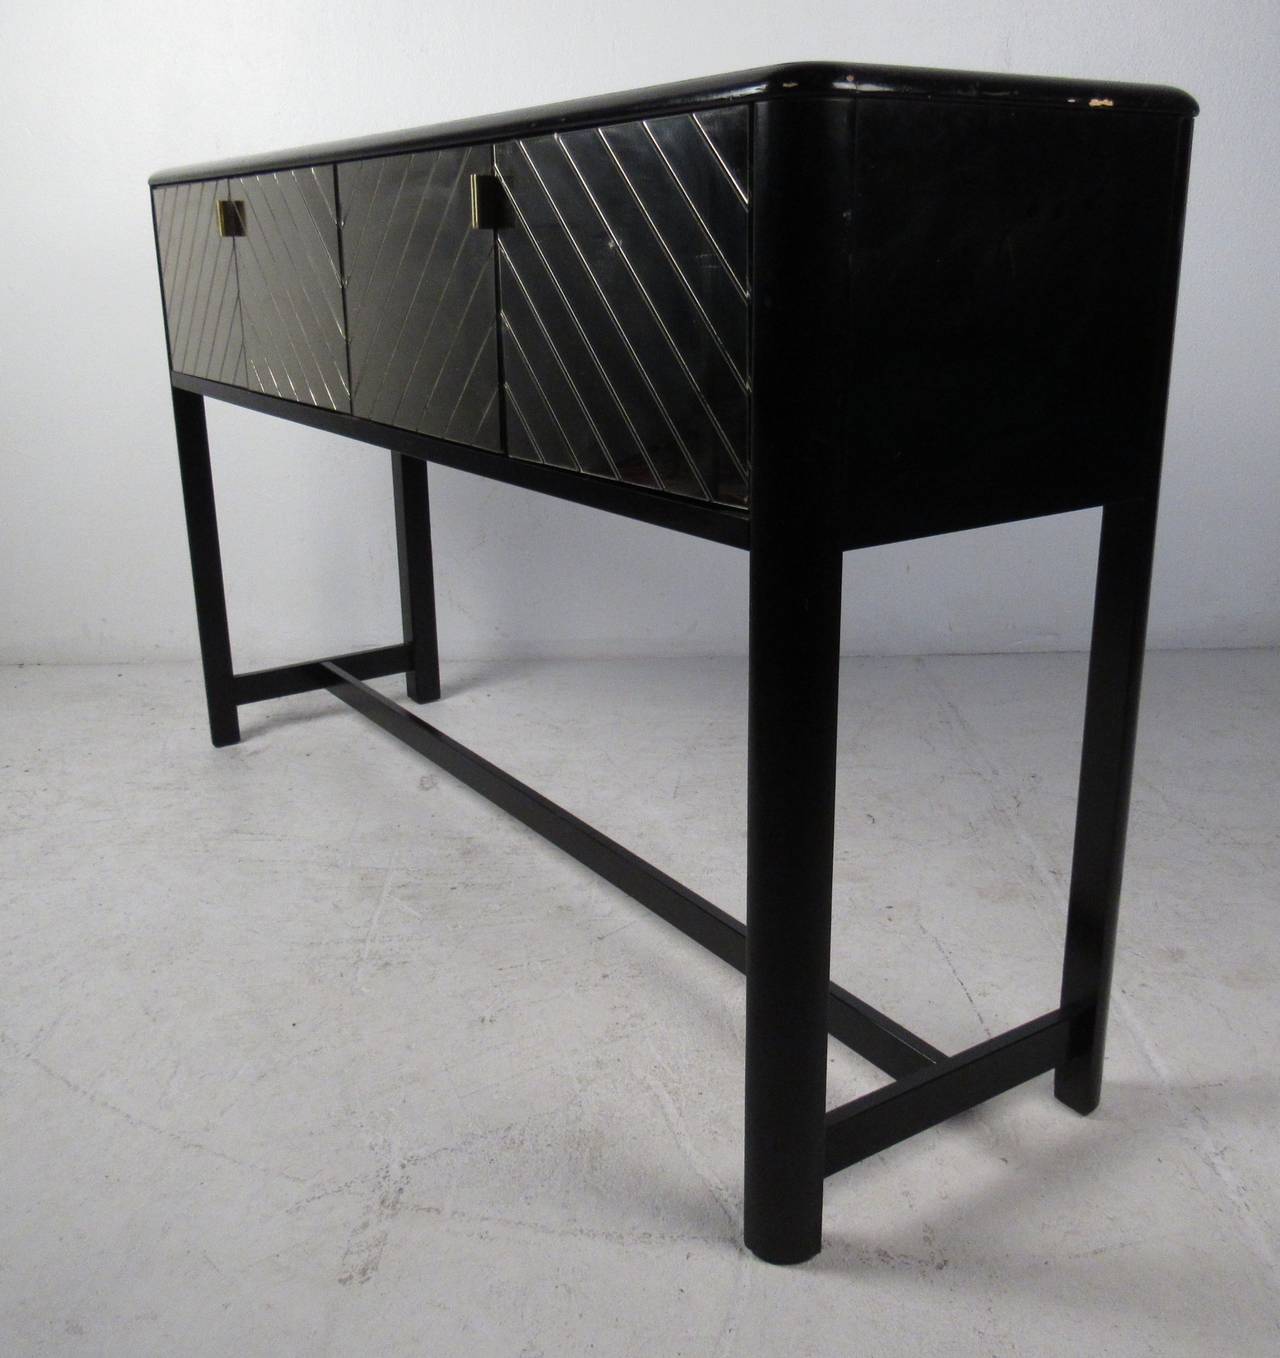 Black lacquer console table with mirrored doors opening to two storage compartments. Please confirm item location (NY or NJ) with dealer.